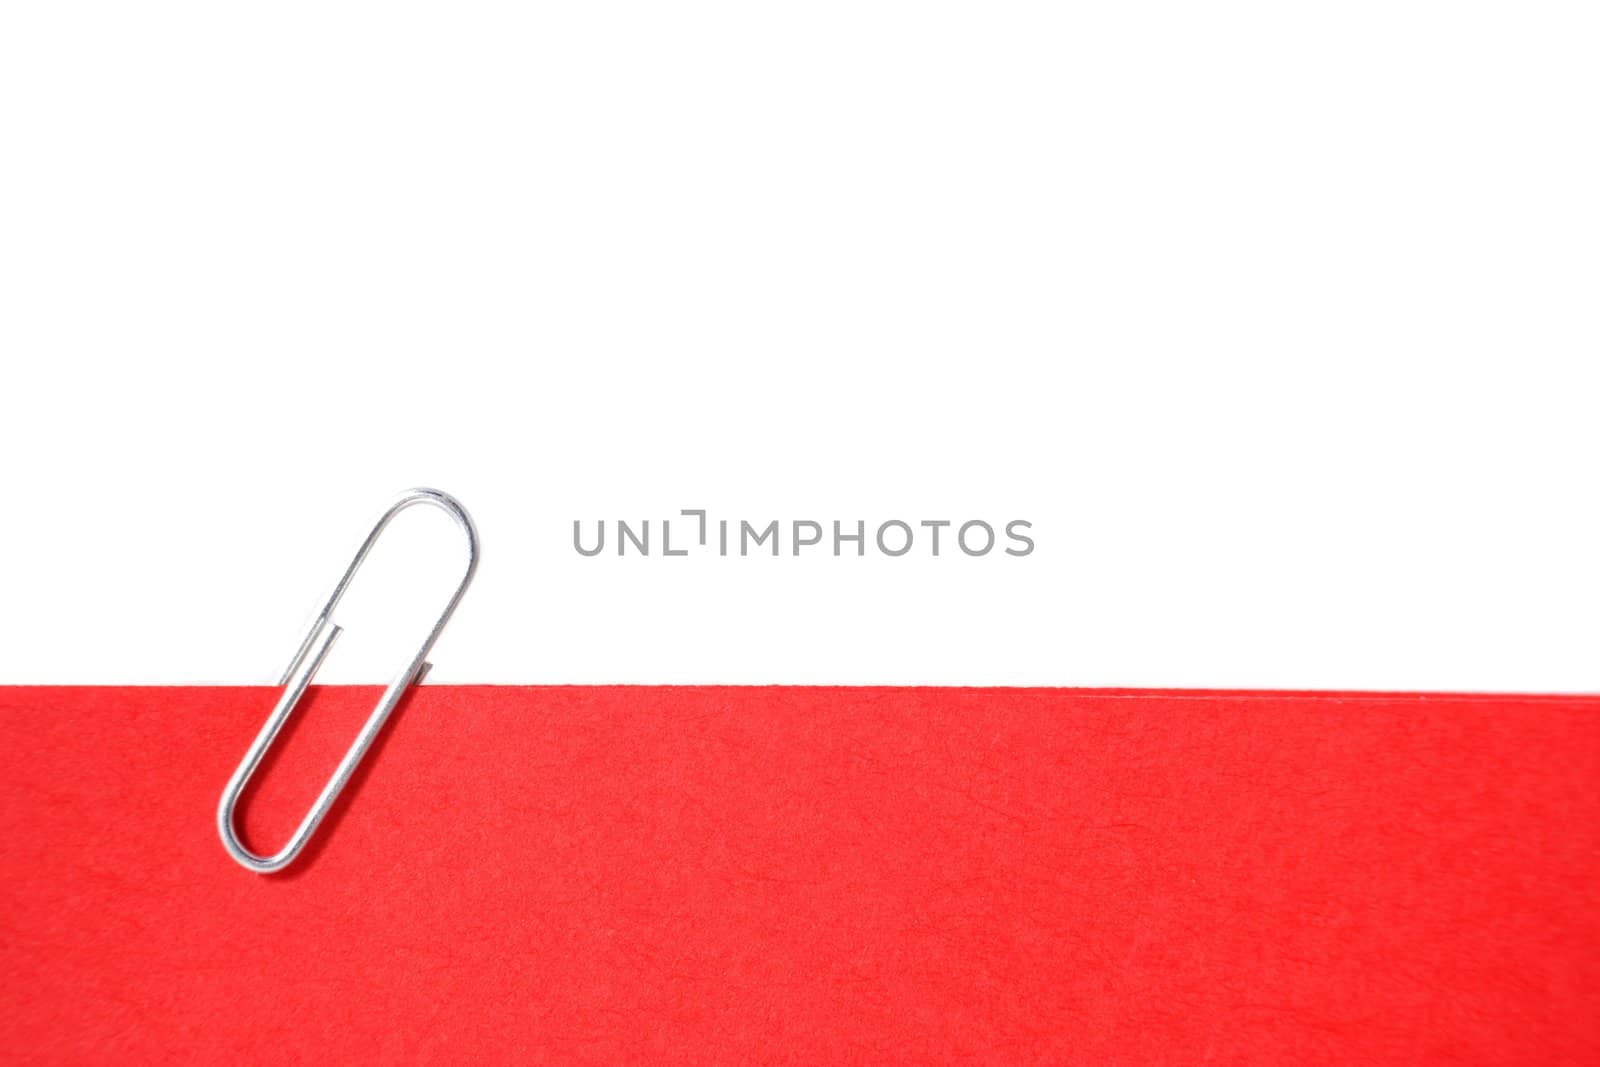 A single paperclip holding a red note. All isolated on white background.